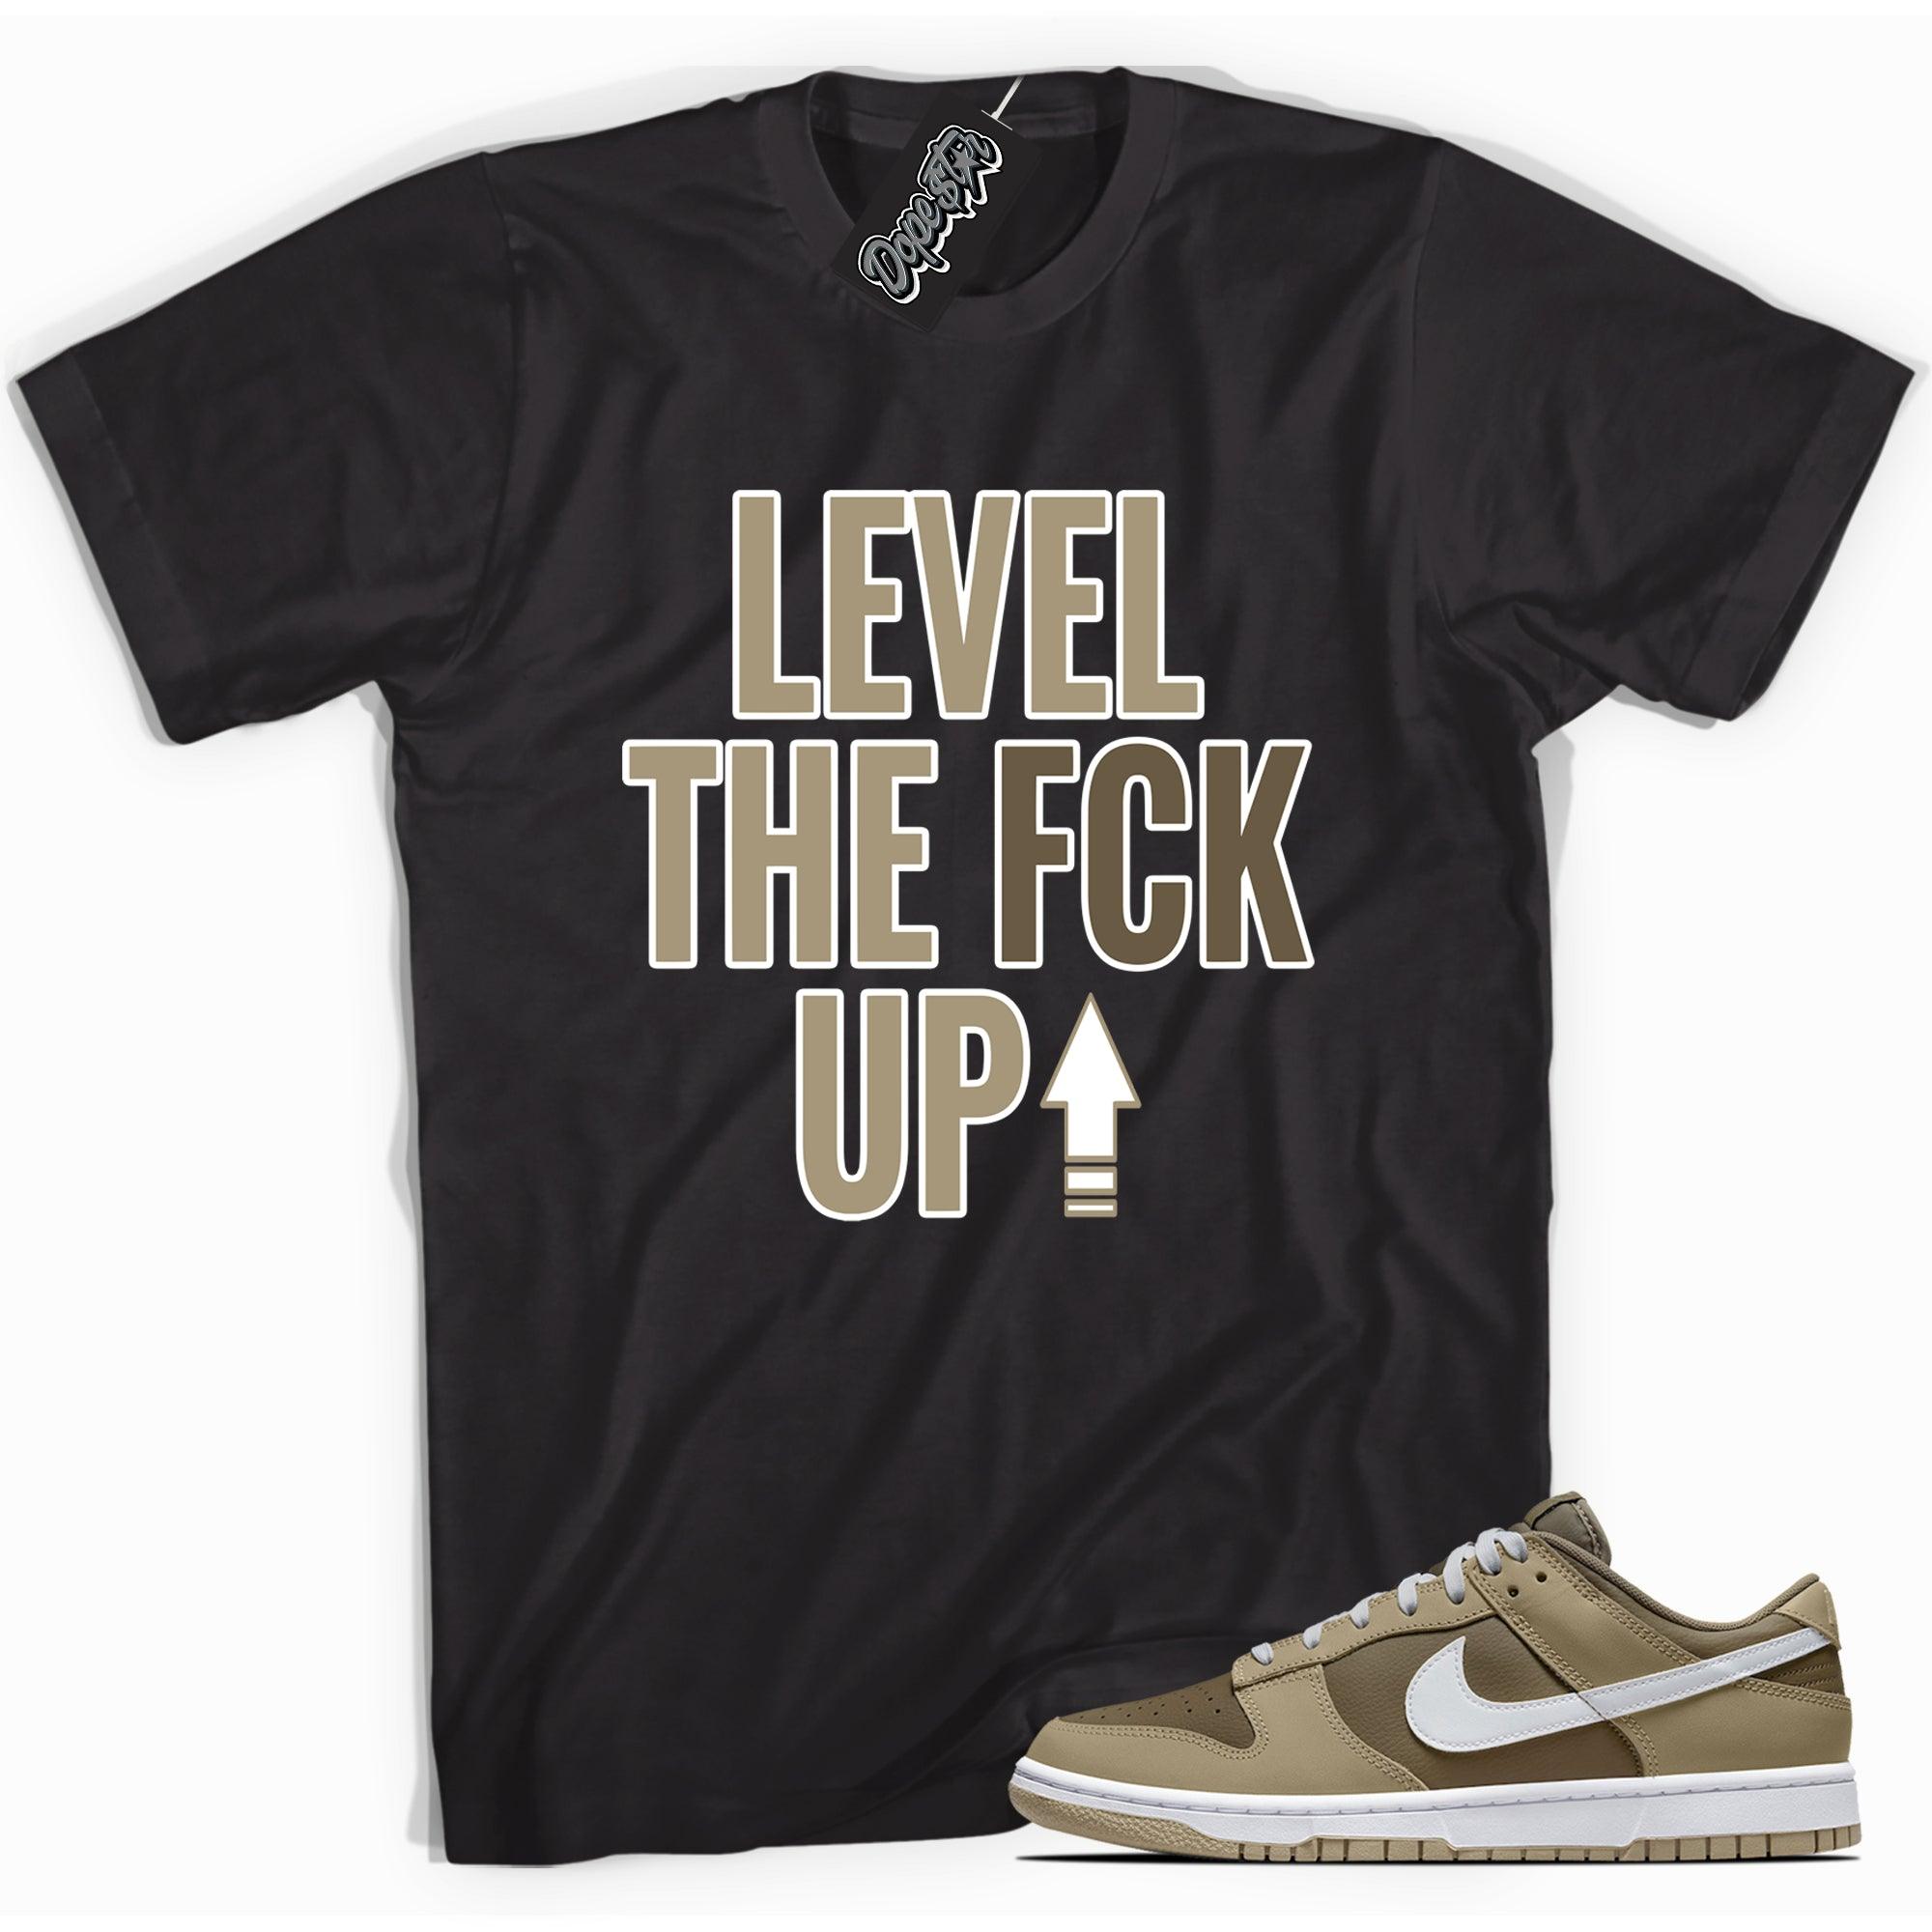 Cool black graphic tee with 'Level Up' print, that perfectly matches Nike Dunk Low Judge Grey sneakers.